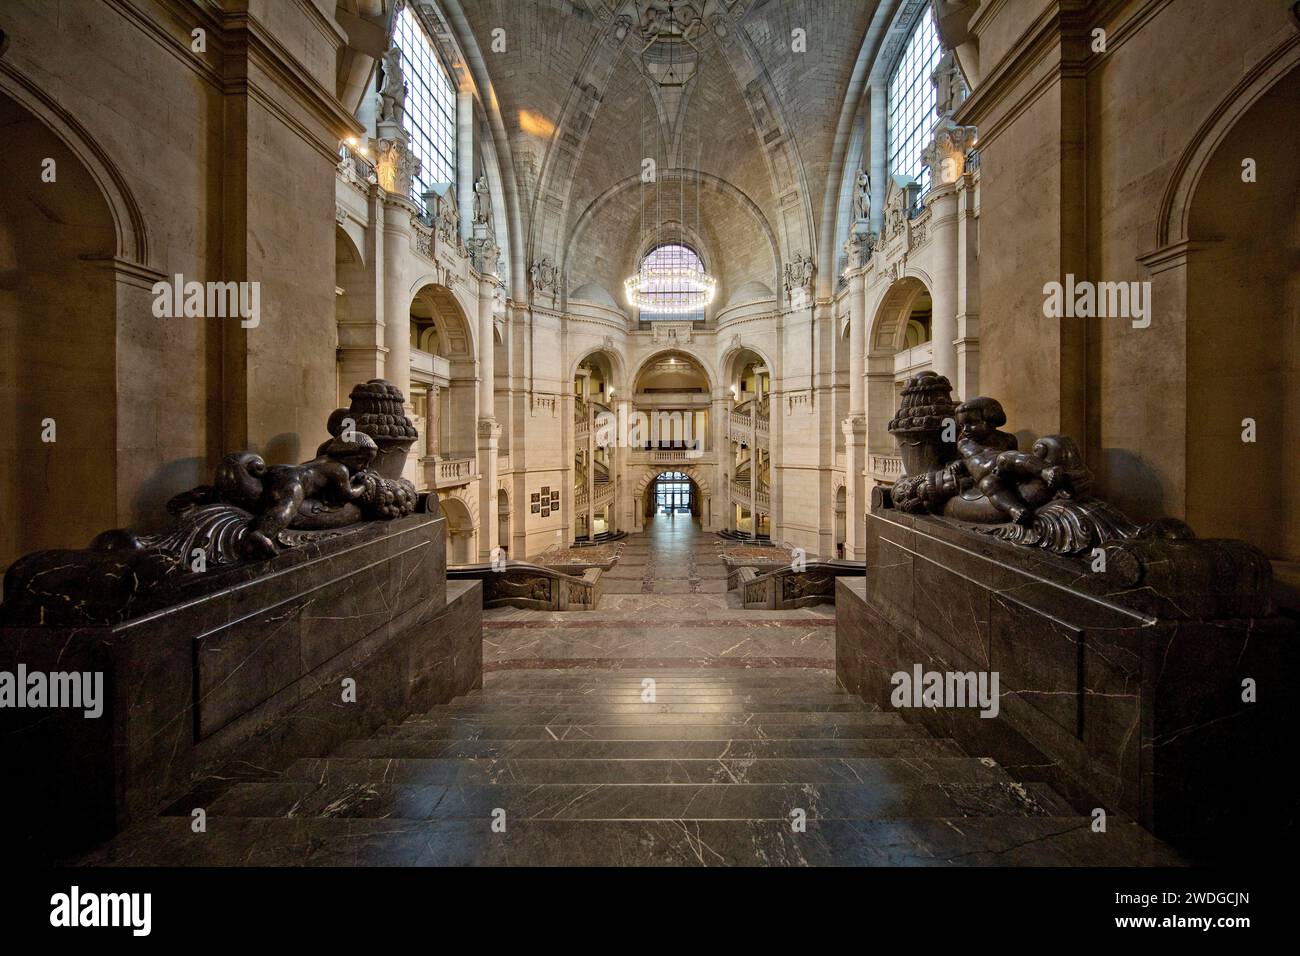 Neues Rathaus, interior view, Wilhelminian palace-like magnificent building in eclectic style, Hanover, Lower Saxony, Germany Stock Photo